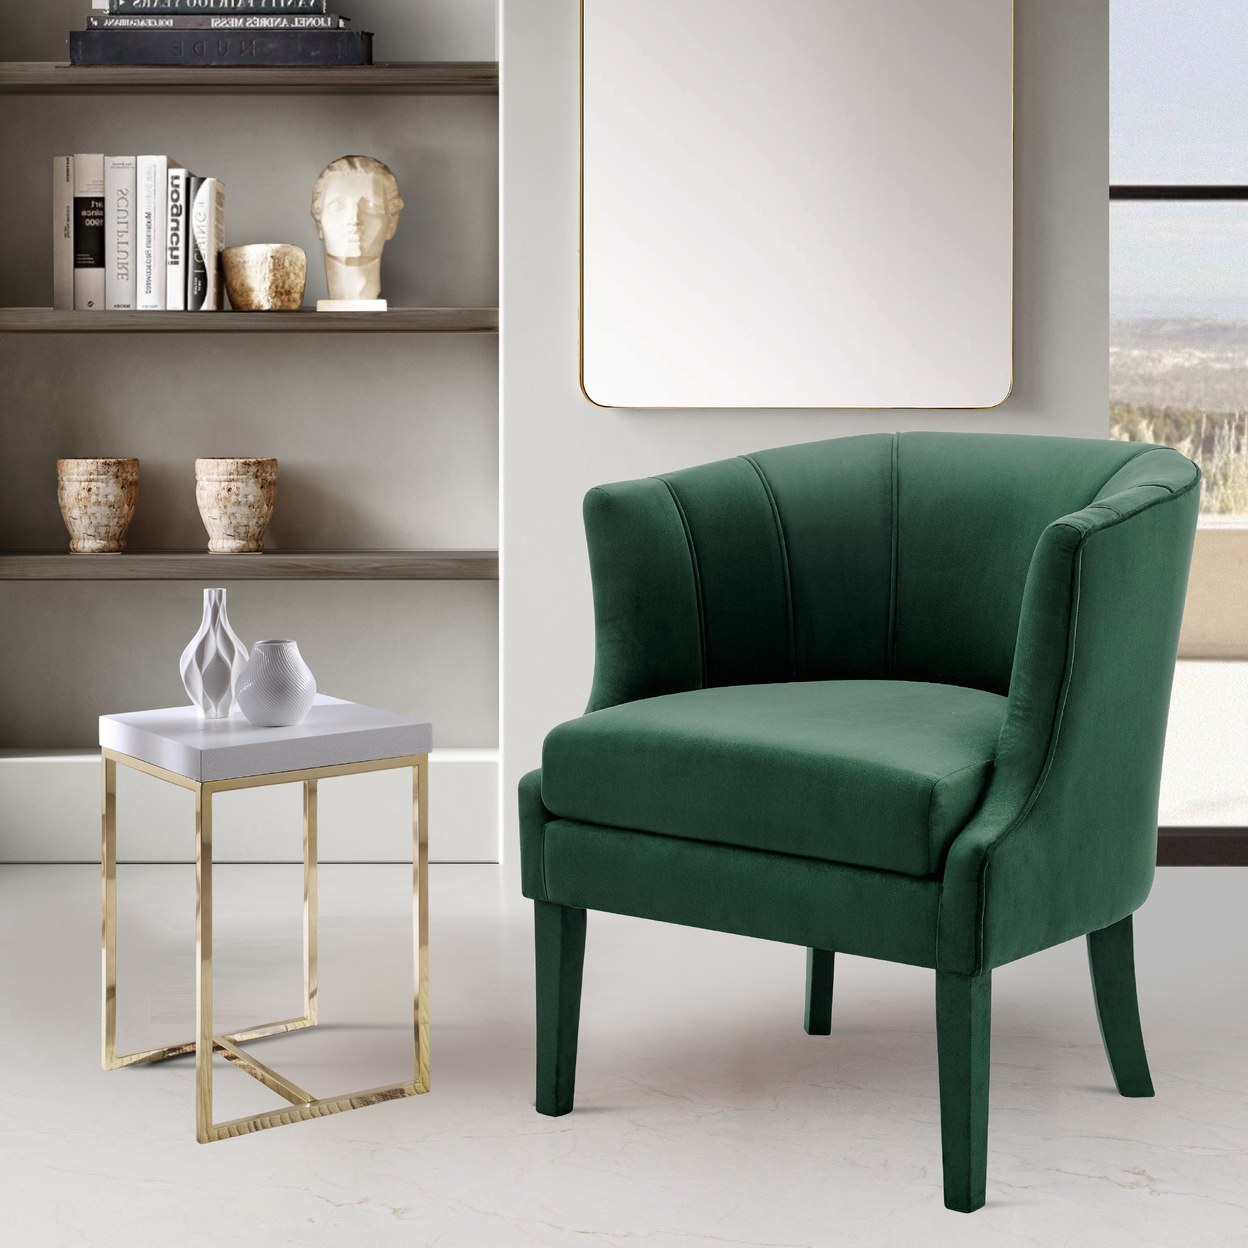 Iconic Home Layne Accent Chair Velvet Upholstered Vertical Channel Quilted Piped Stitching Barrel Back Design Upholstered Flared Legs - Gree